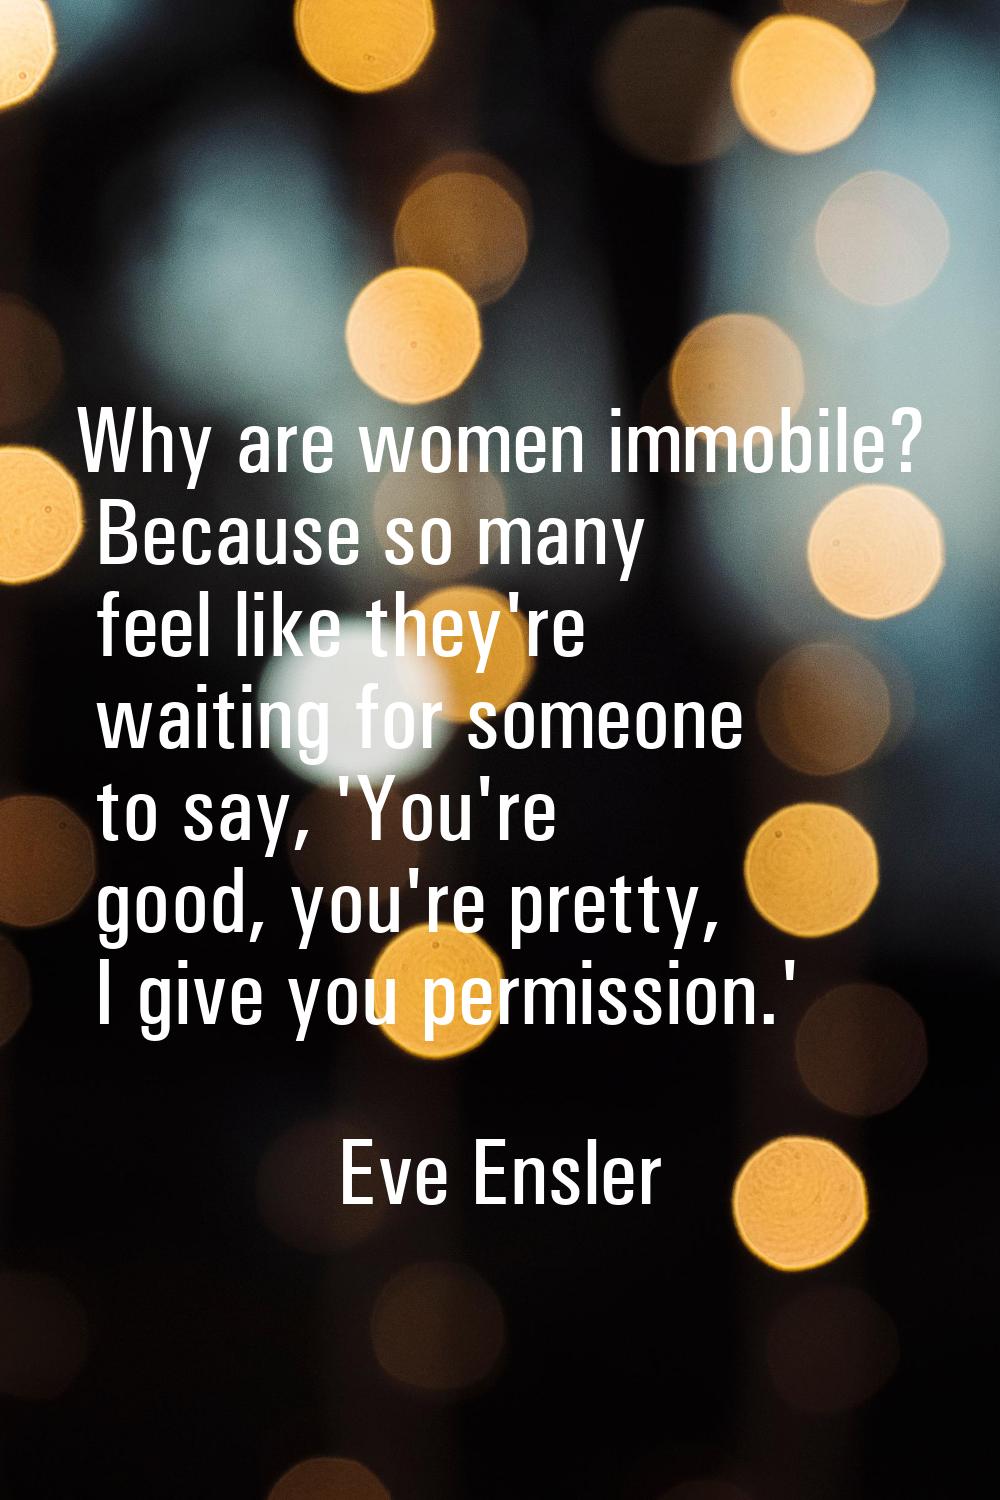 Why are women immobile? Because so many feel like they're waiting for someone to say, 'You're good,